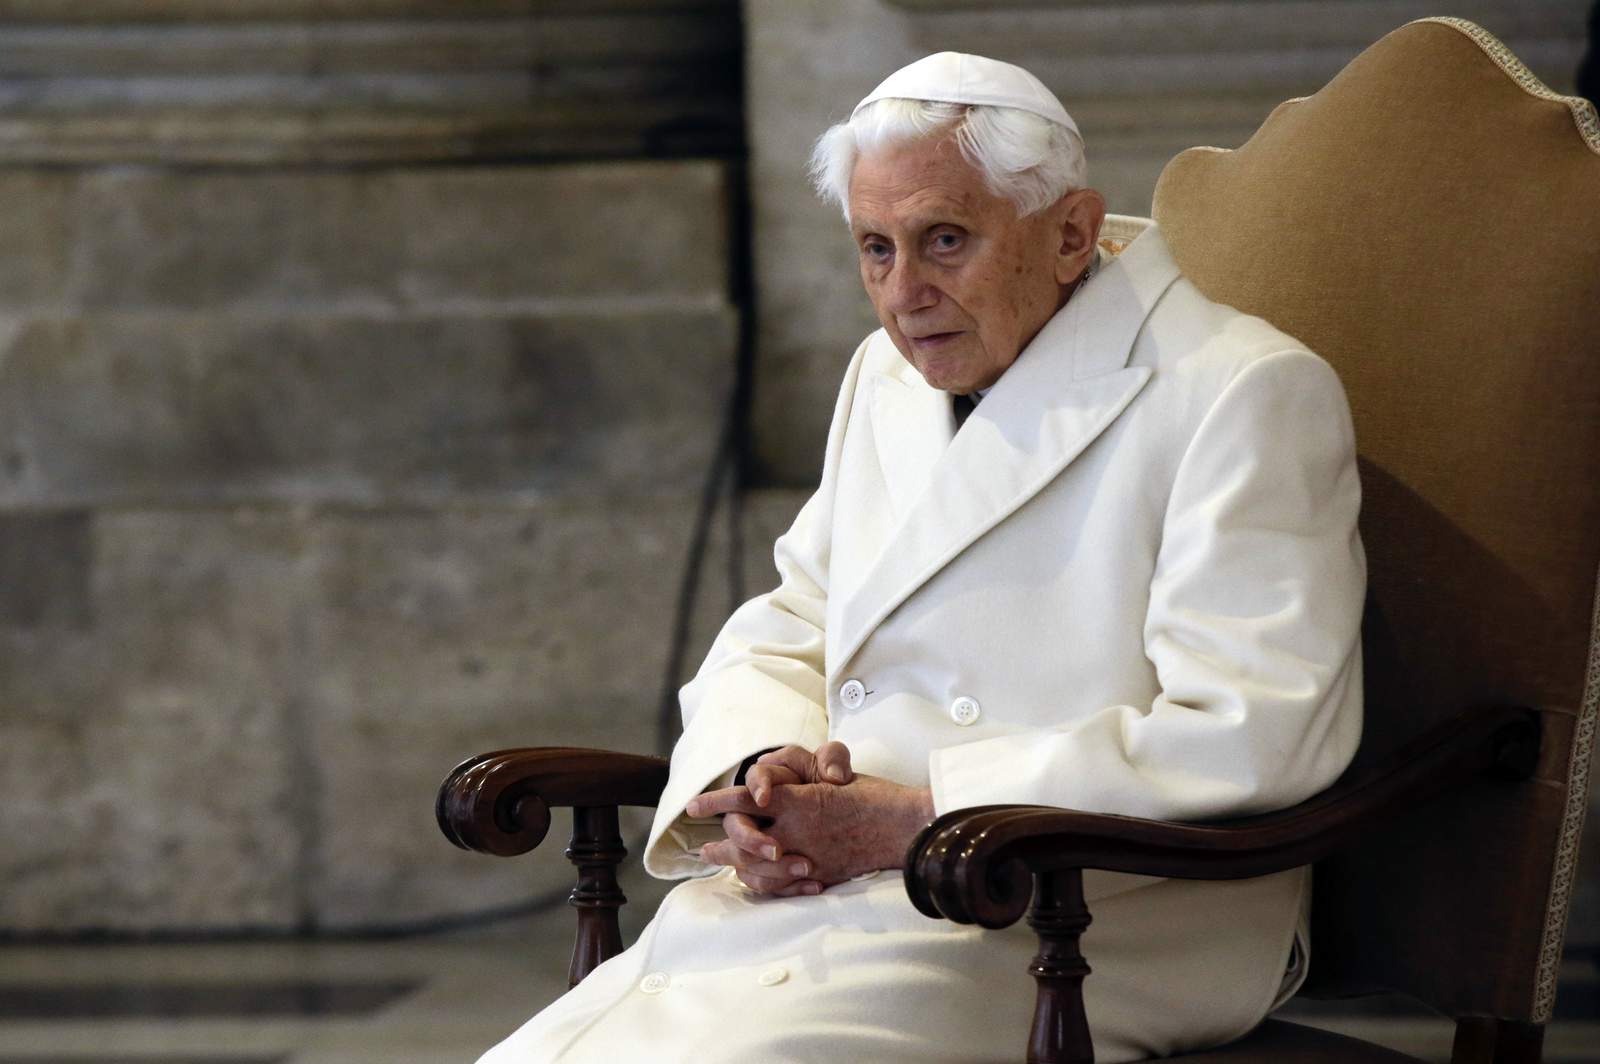 Report: Retired Pope Benedict XVI ill after visit to Germany